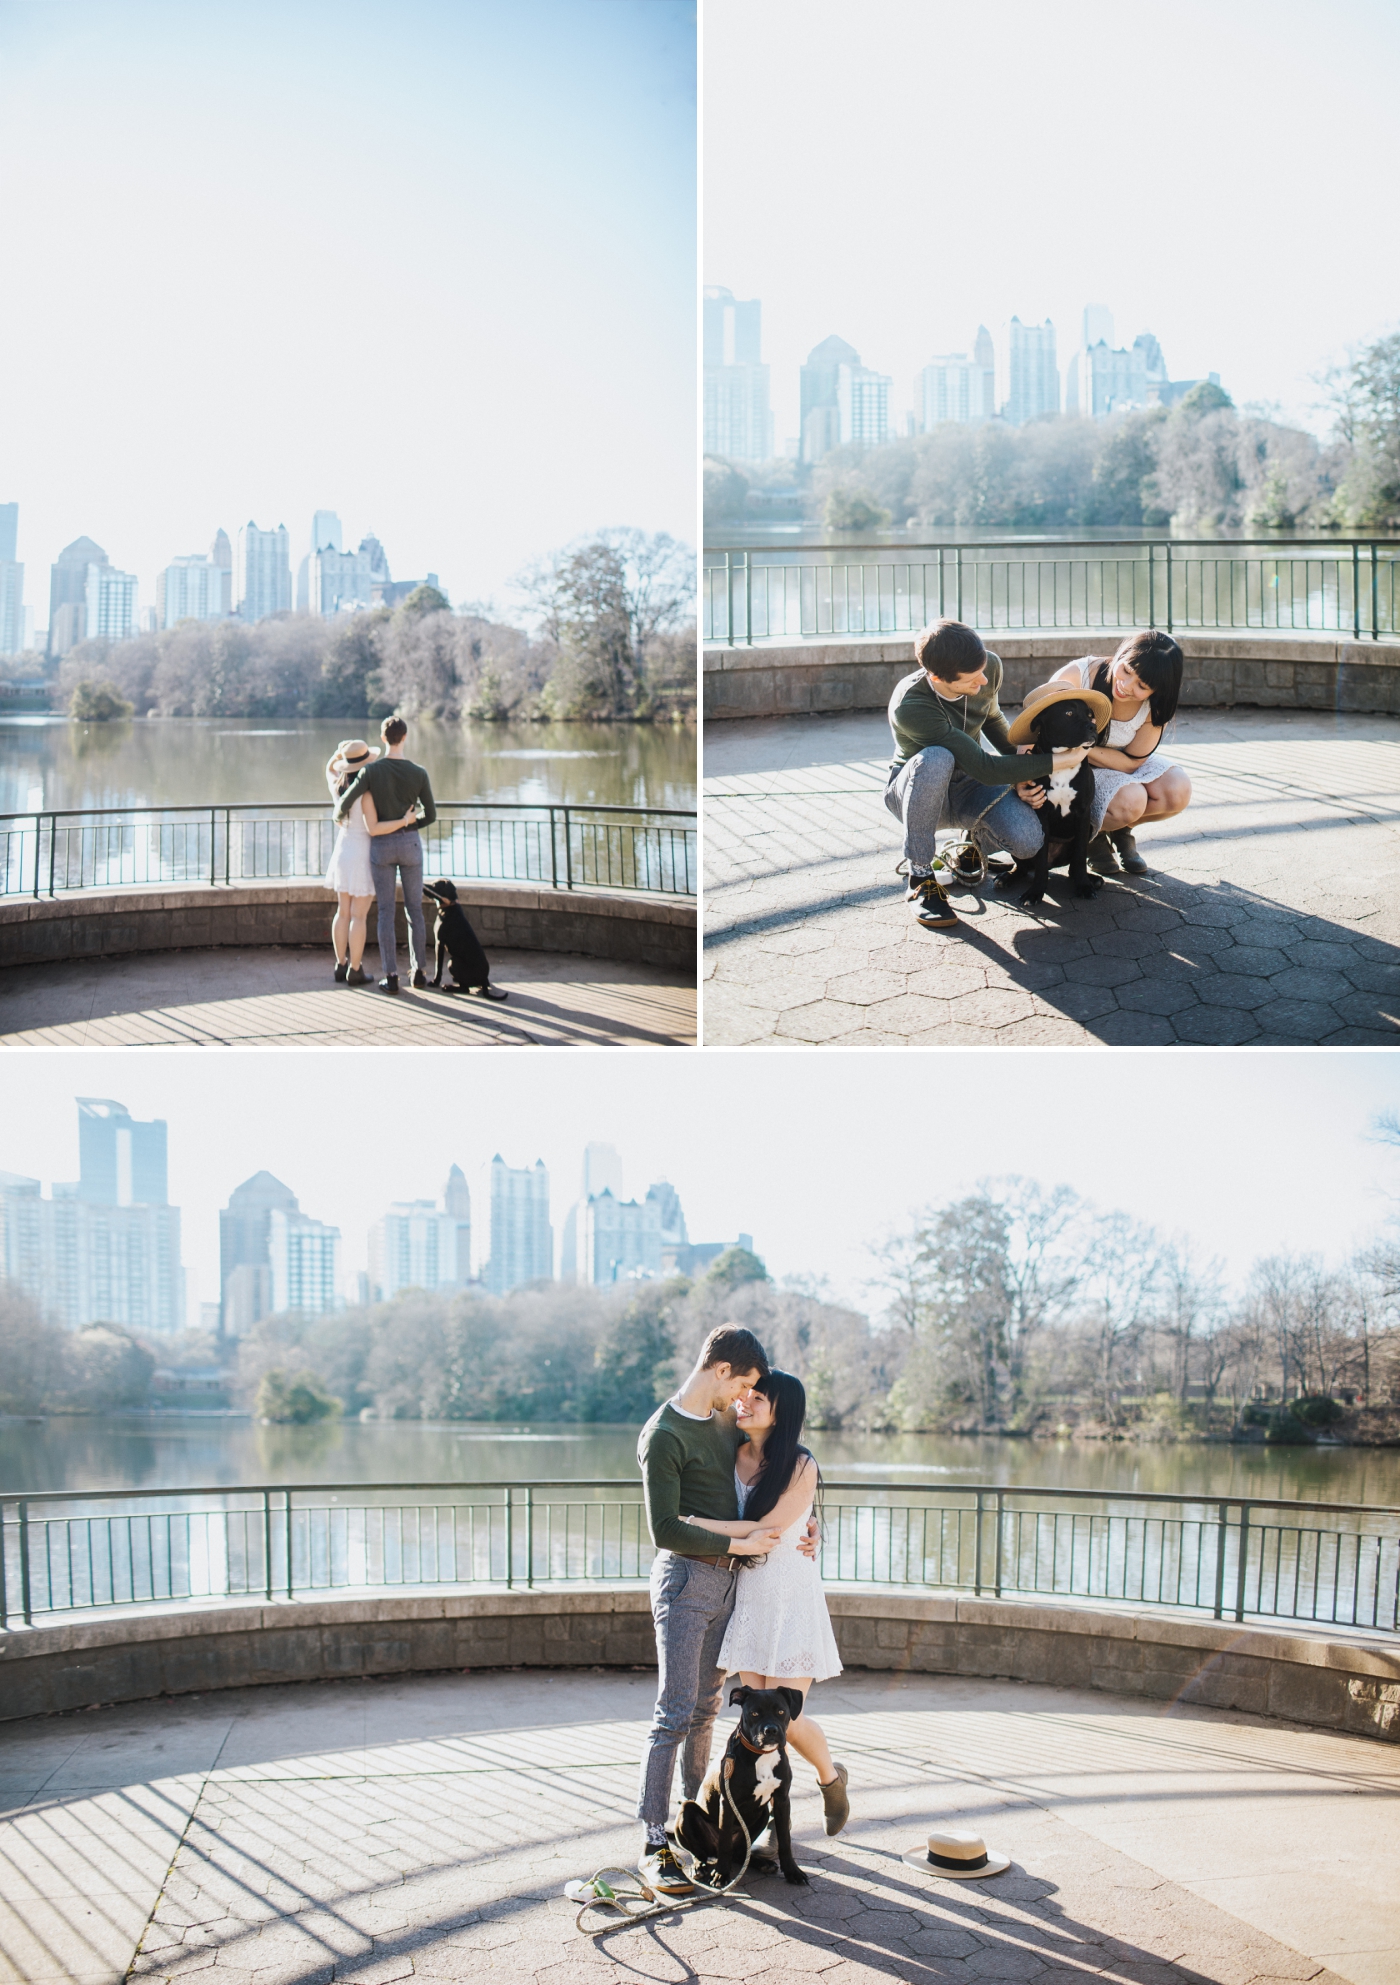 Janet and Will’s Engagement Session at Piedmont Park